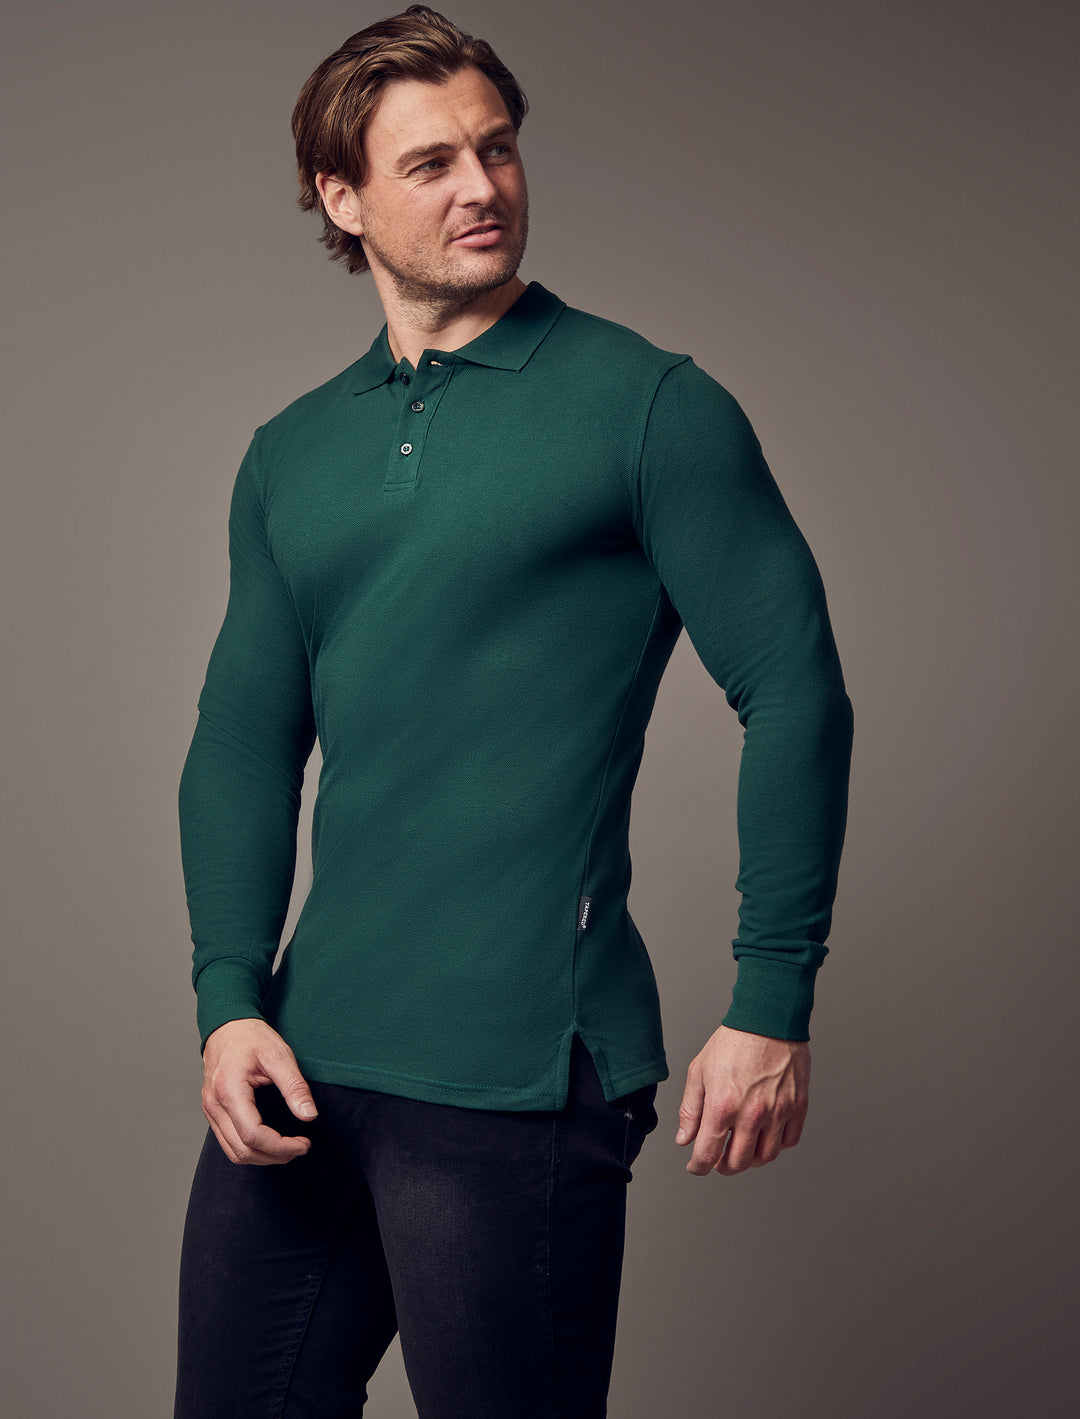 long sleeve green tapered fit polo shirt, emphasizing the muscle fit features for a flattering and well-defined look by Tapered Menswear